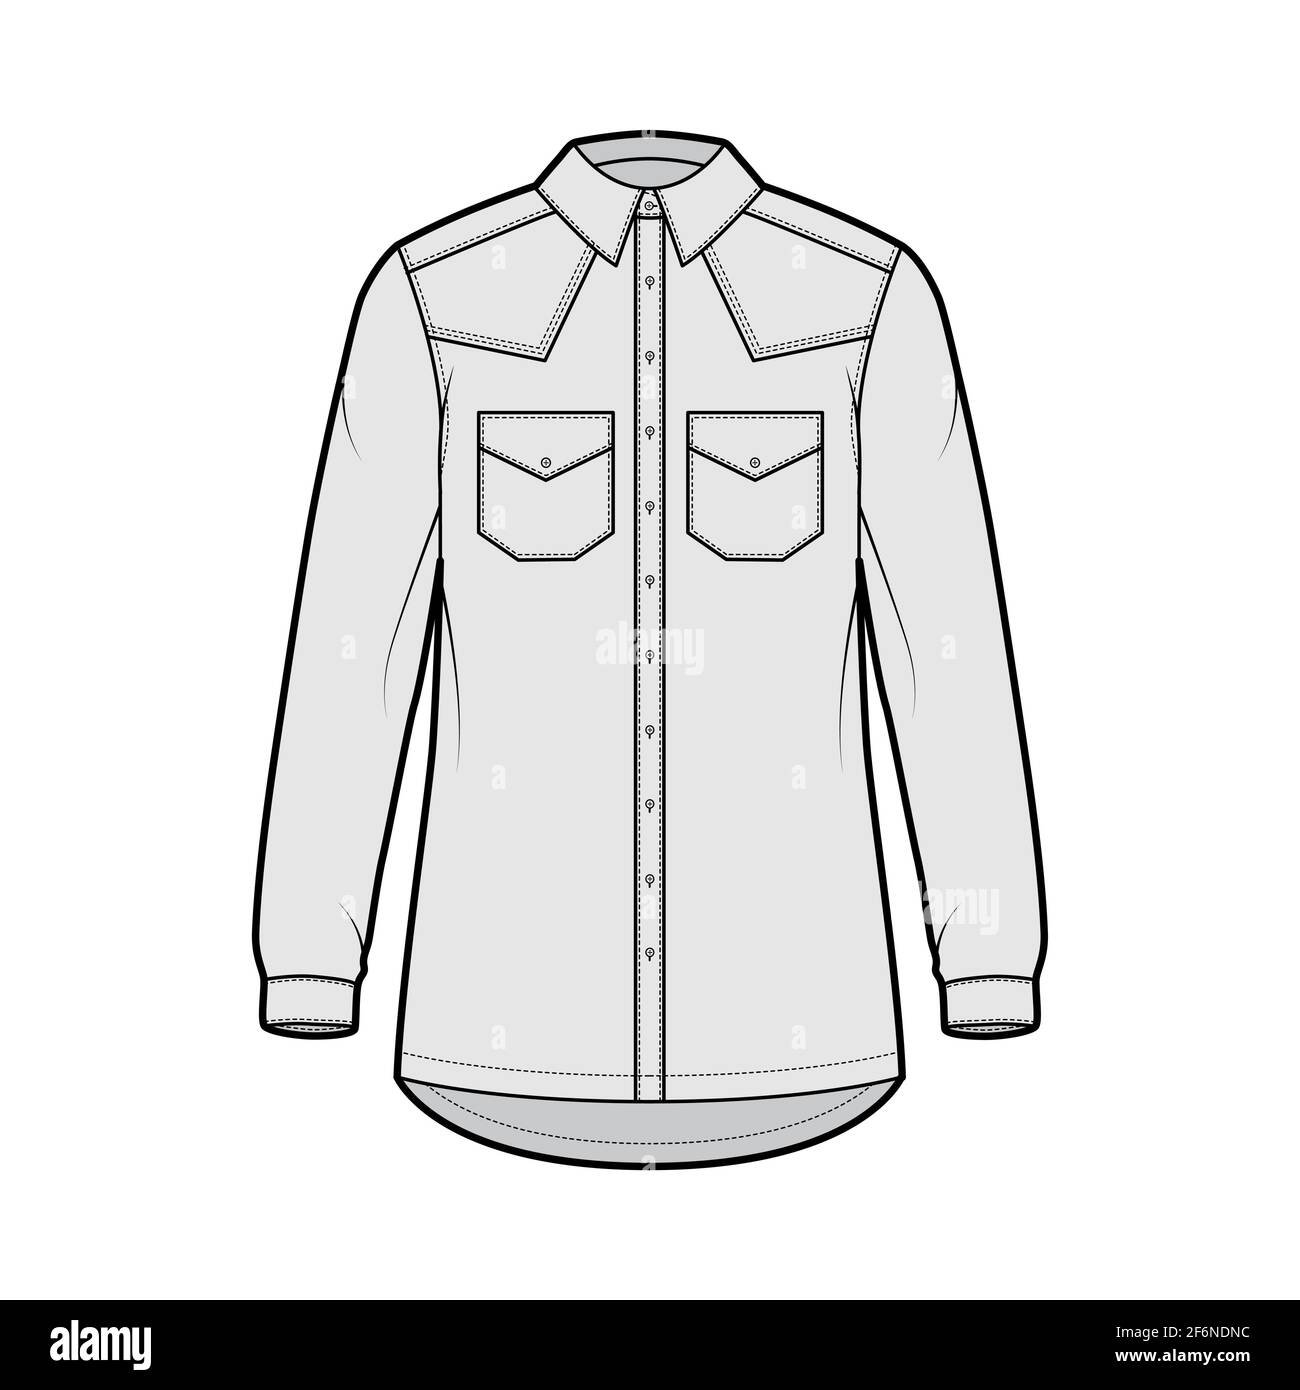 Denim shirt jacket technical fashion illustration with oversized body, flap pockets, button closure, classic collar, long sleeves. Flat apparel front, grey color style. Women, men unisex CAD mockup Stock Vector